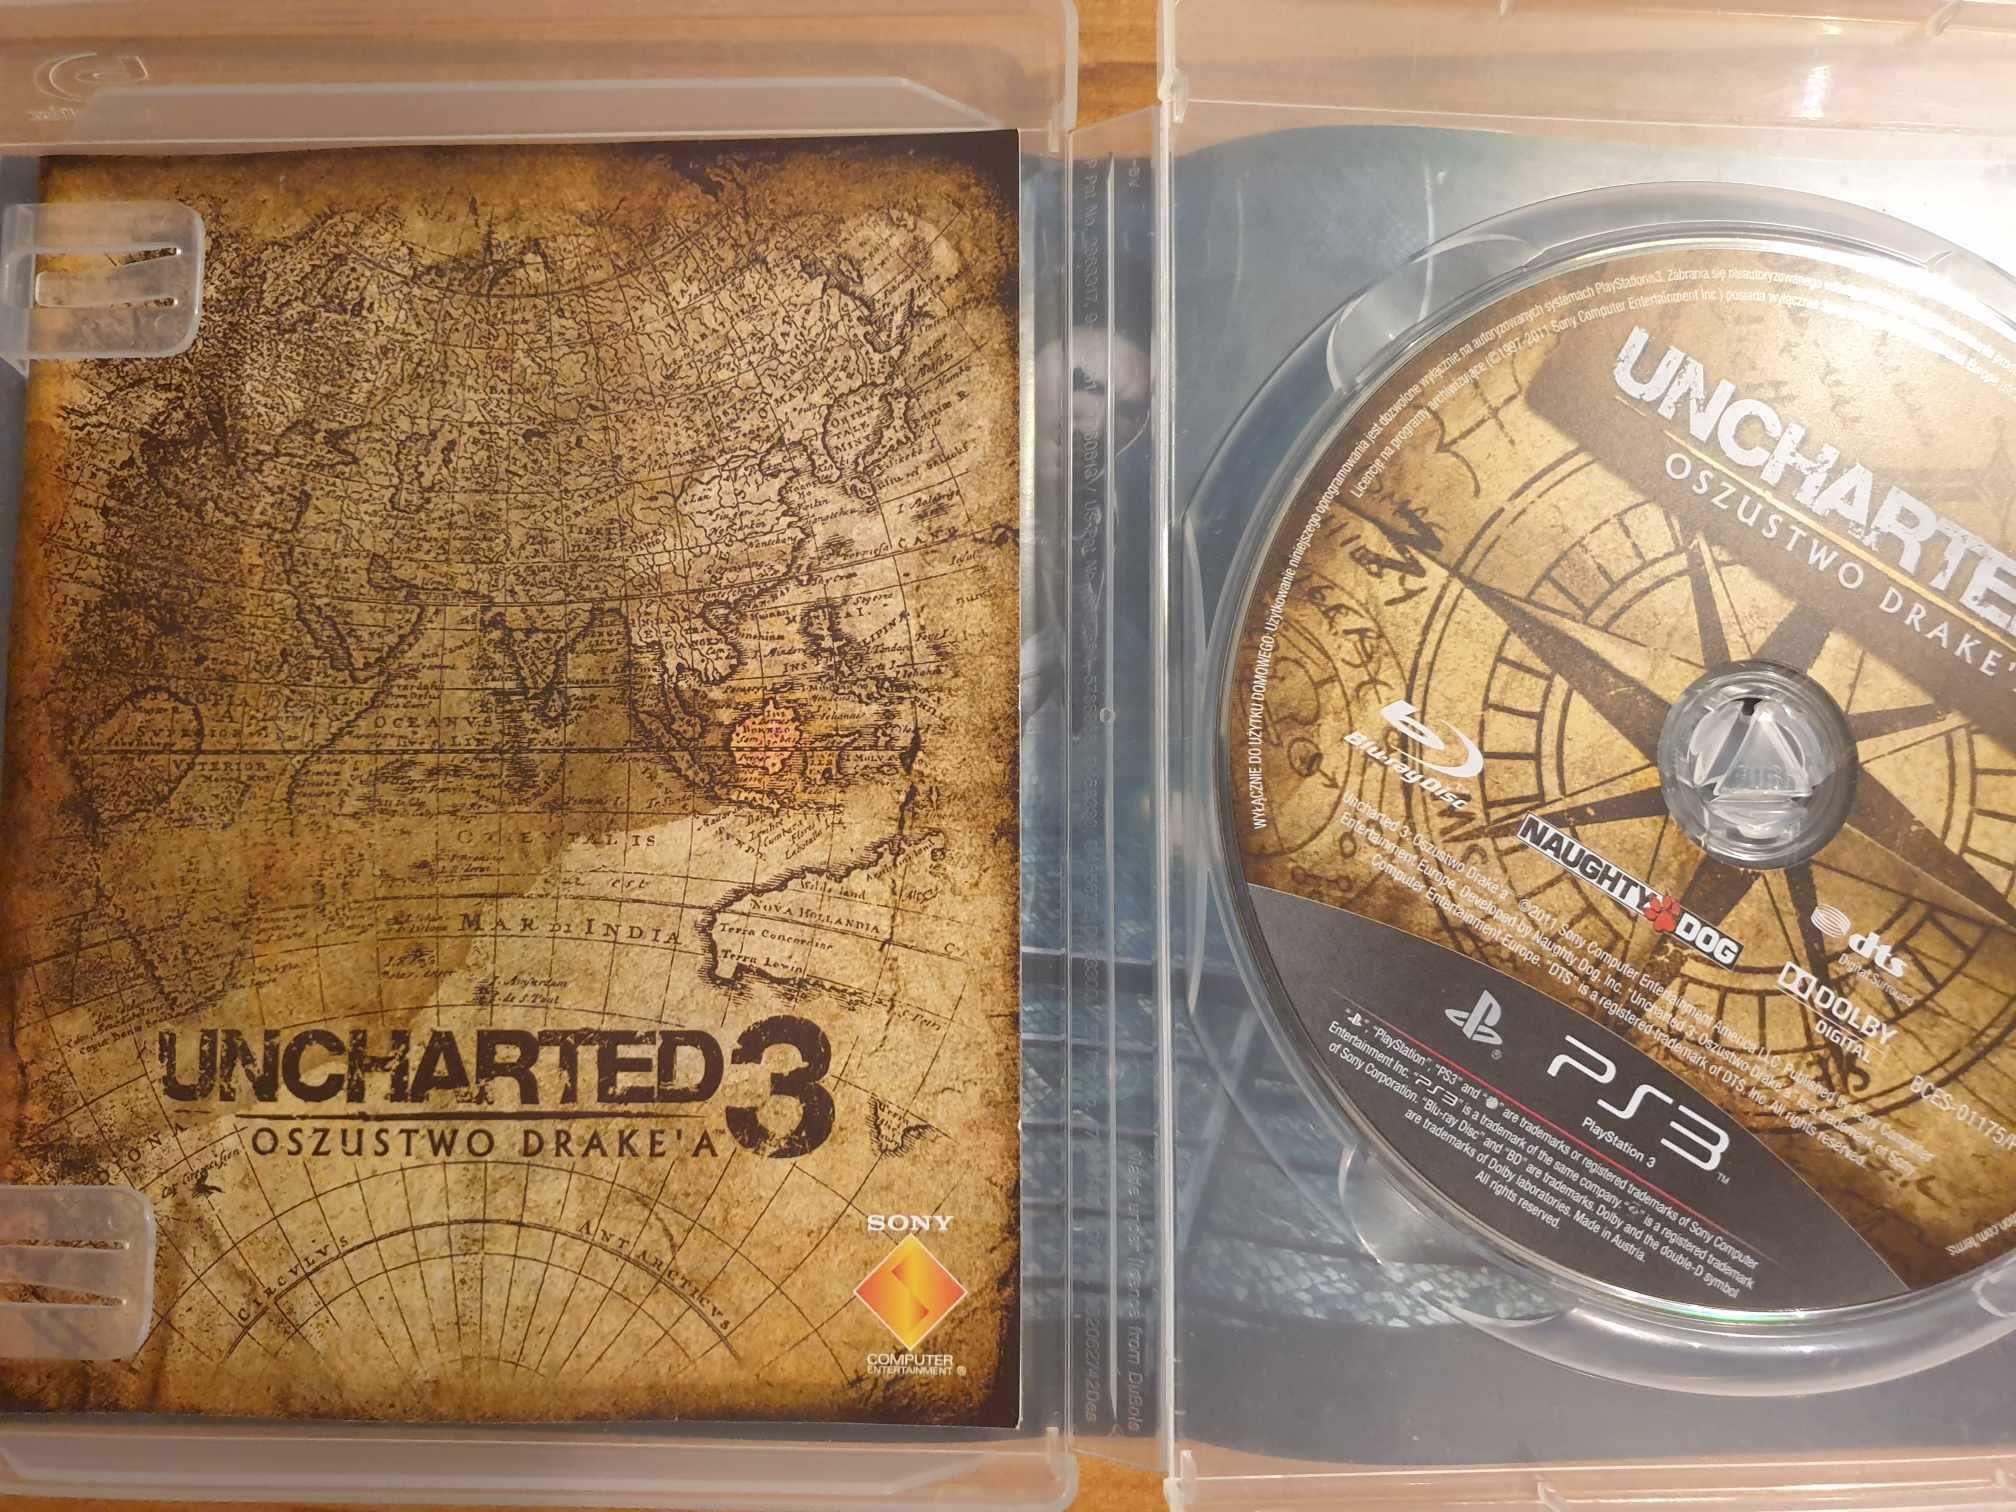 Uncharted 3 Oszustwo Drake'a PL PS3